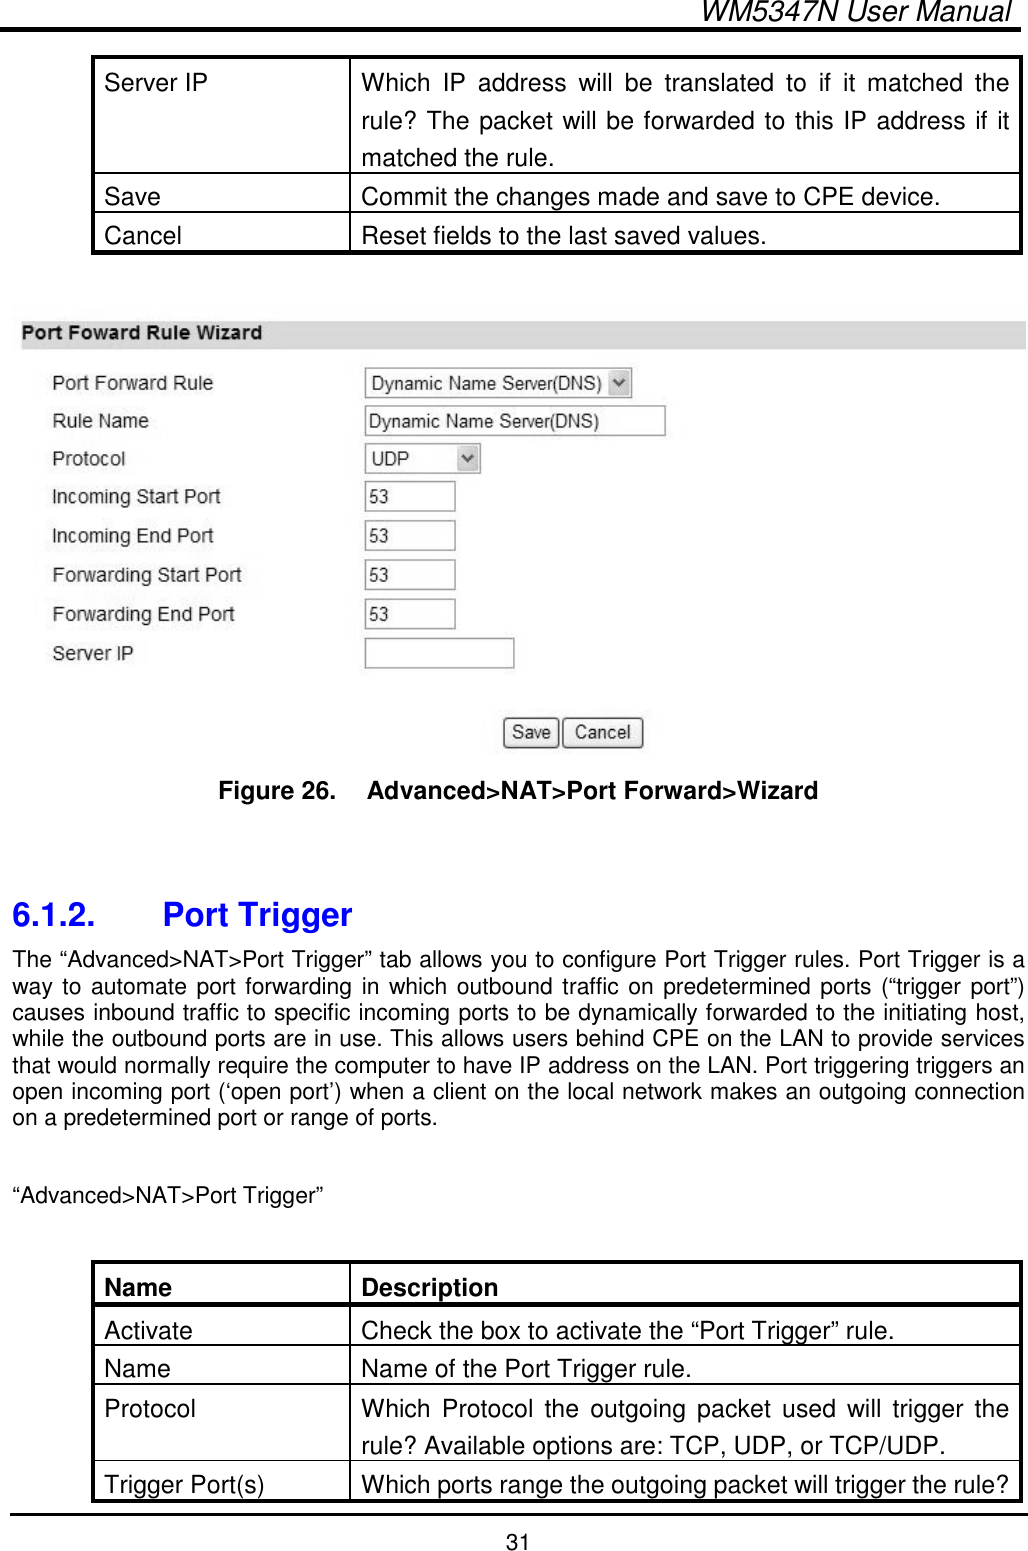  WM5347N User Manual  31 Server IP  Which  IP  address  will  be  translated  to  if  it  matched  the rule? The packet will be forwarded to this IP address if it matched the rule. Save  Commit the changes made and save to CPE device. Cancel  Reset fields to the last saved values.   Figure 26.   Advanced&gt;NAT&gt;Port Forward&gt;Wizard   6.1.2.  Port Trigger The “Advanced&gt;NAT&gt;Port Trigger” tab allows you to configure Port Trigger rules. Port Trigger is a way to automate port forwarding in which outbound traffic on predetermined ports (“trigger port”) causes inbound traffic to specific incoming ports to be dynamically forwarded to the initiating host, while the outbound ports are in use. This allows users behind CPE on the LAN to provide services that would normally require the computer to have IP address on the LAN. Port triggering triggers an open incoming port (‘open port’) when a client on the local network makes an outgoing connection on a predetermined port or range of ports.  “Advanced&gt;NAT&gt;Port Trigger”  Name  Description Activate  Check the box to activate the “Port Trigger” rule. Name  Name of the Port Trigger rule. Protocol  Which Protocol  the  outgoing  packet  used  will  trigger the rule? Available options are: TCP, UDP, or TCP/UDP. Trigger Port(s)  Which ports range the outgoing packet will trigger the rule? 